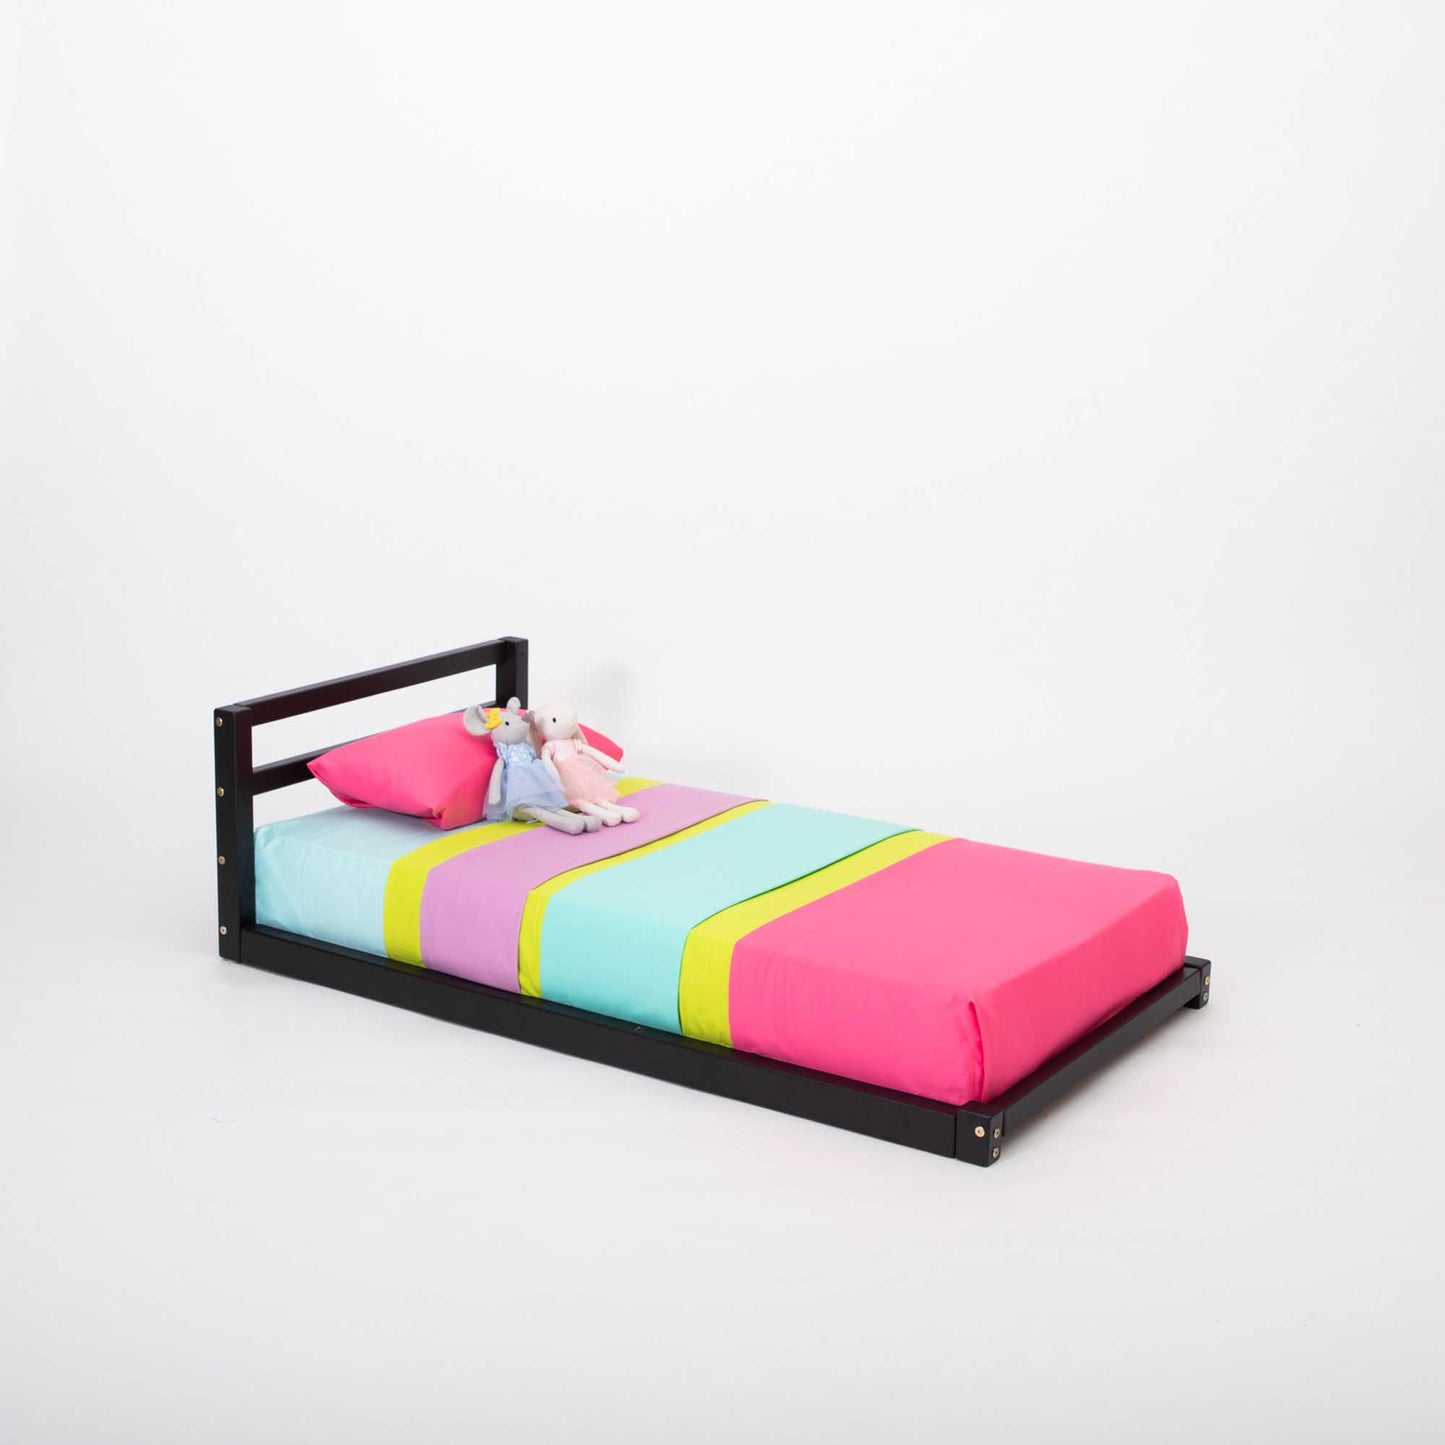 A Toddler floor bed with a horizontal rail headboard from Sweet Home From Wood, perfect for either boys or girls.